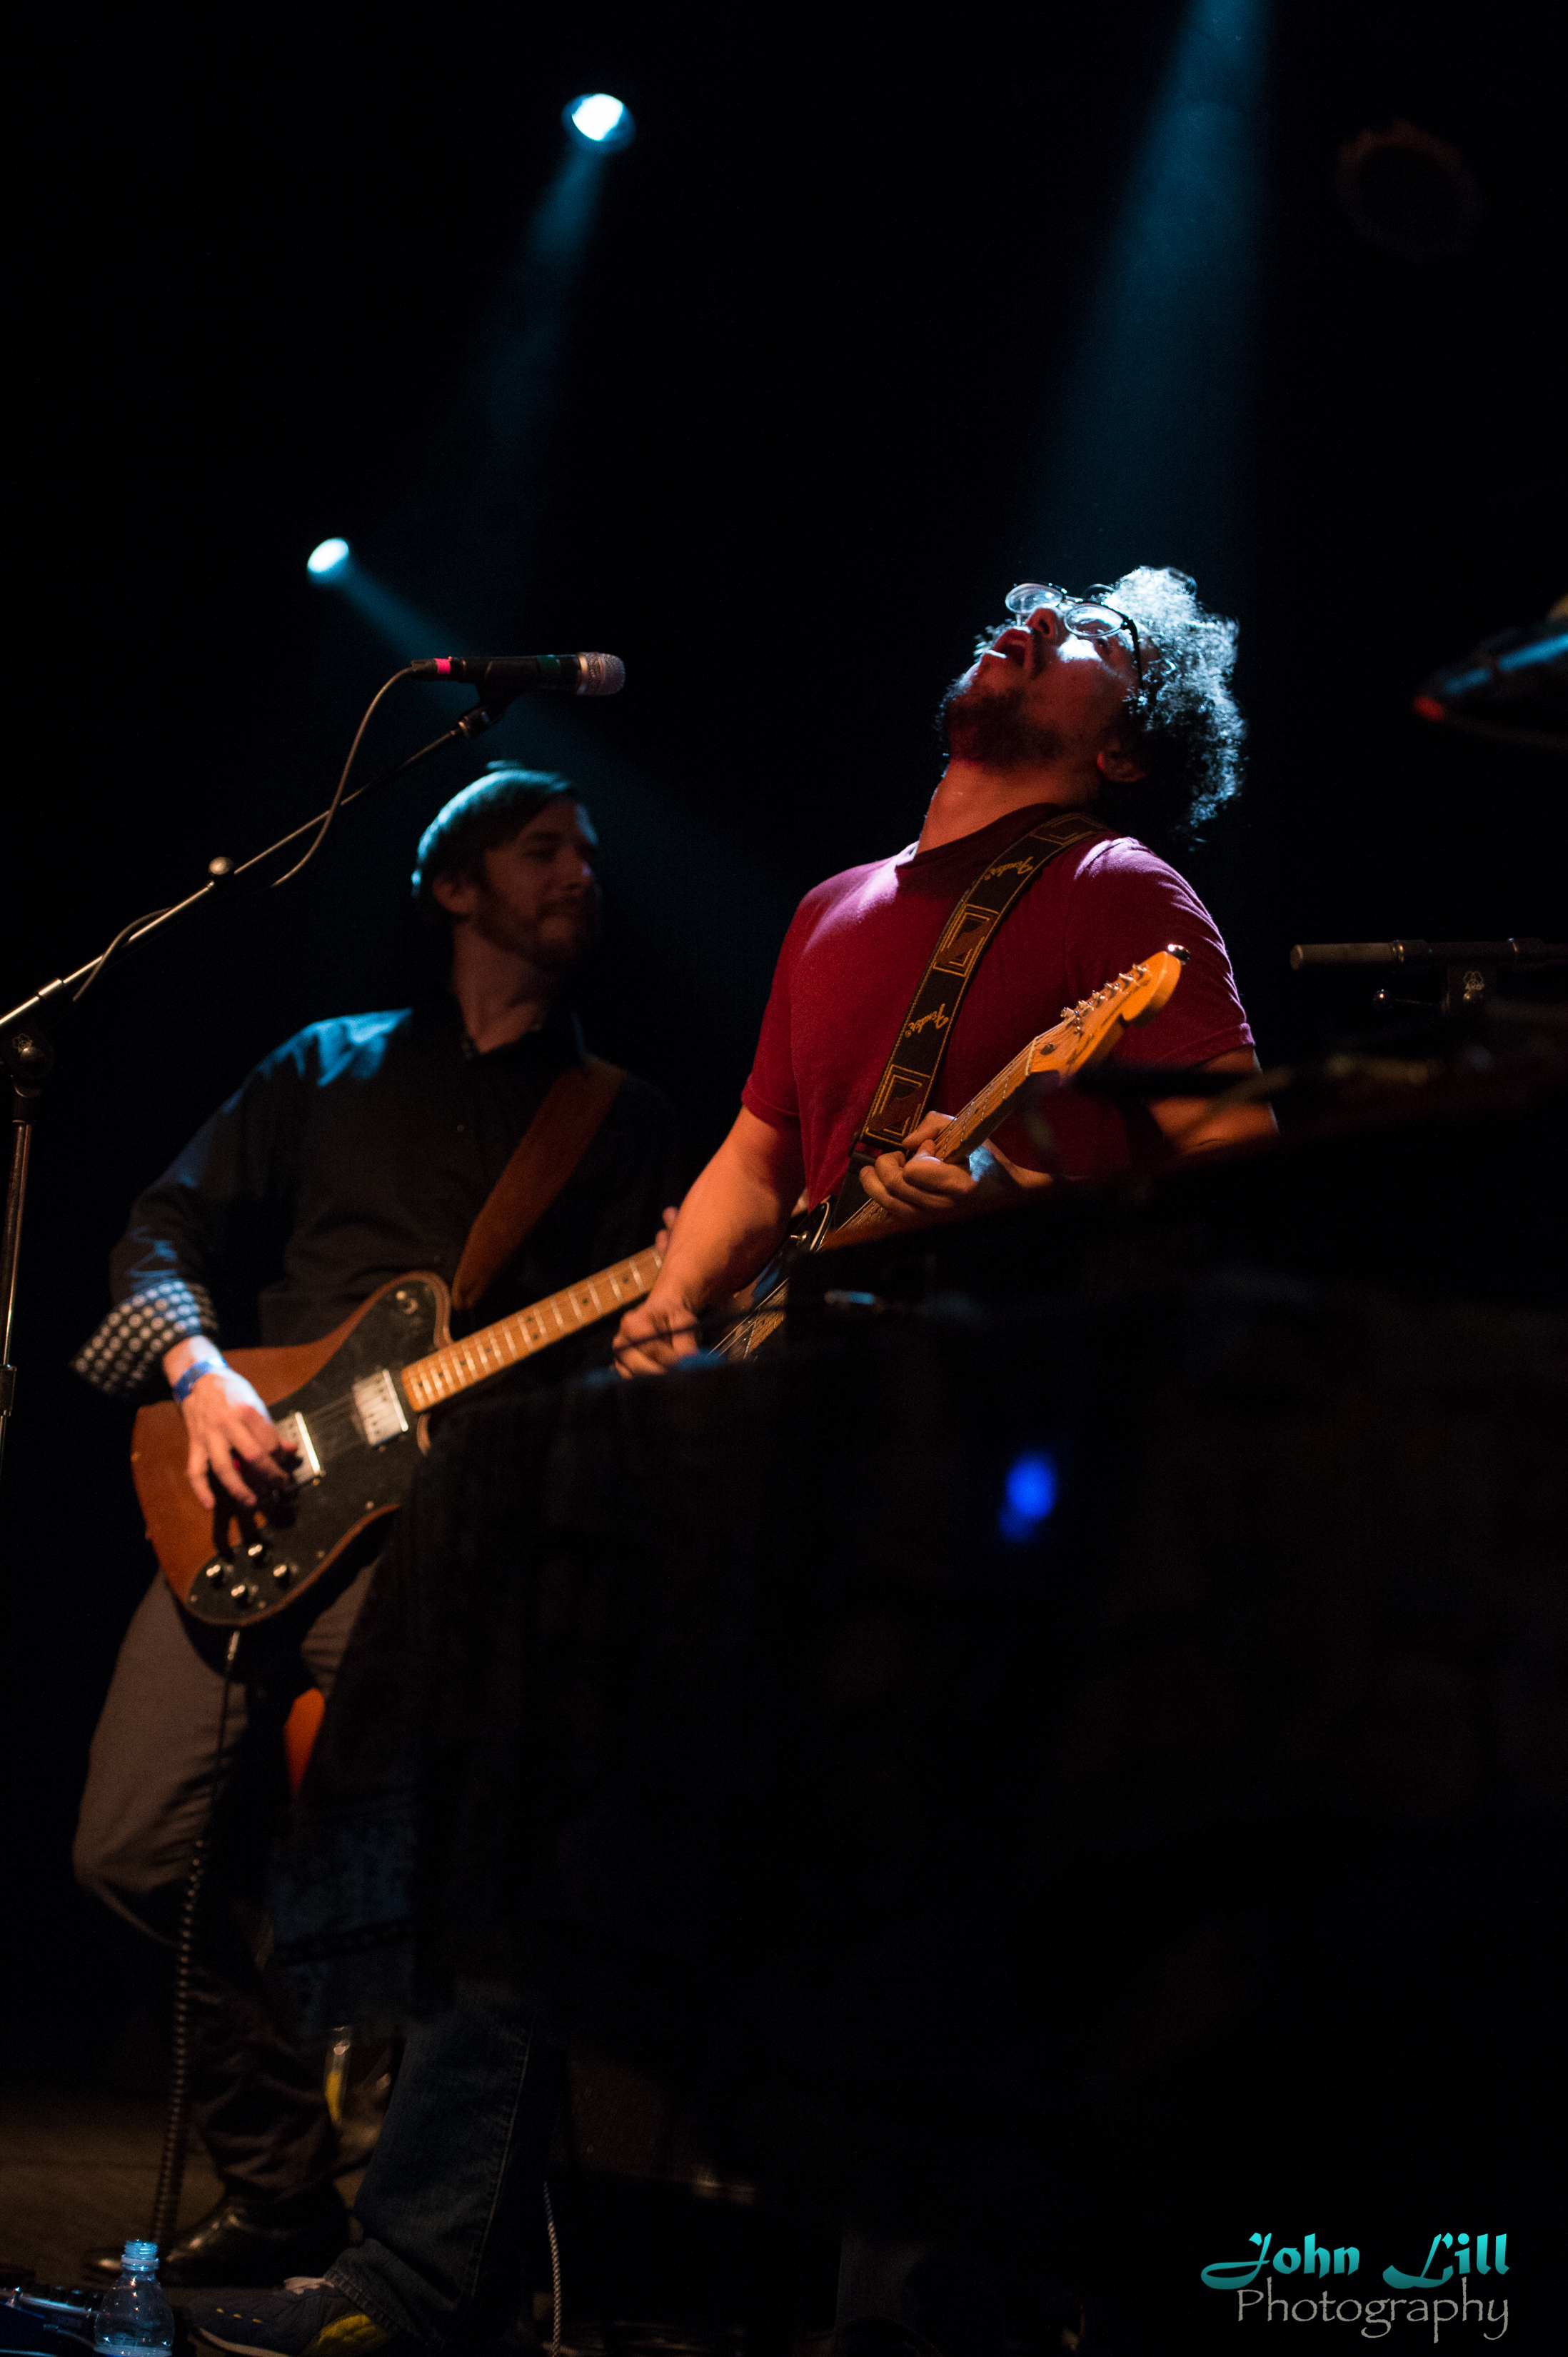 Orgone Live at The Crocodile (Photo by John Lill)